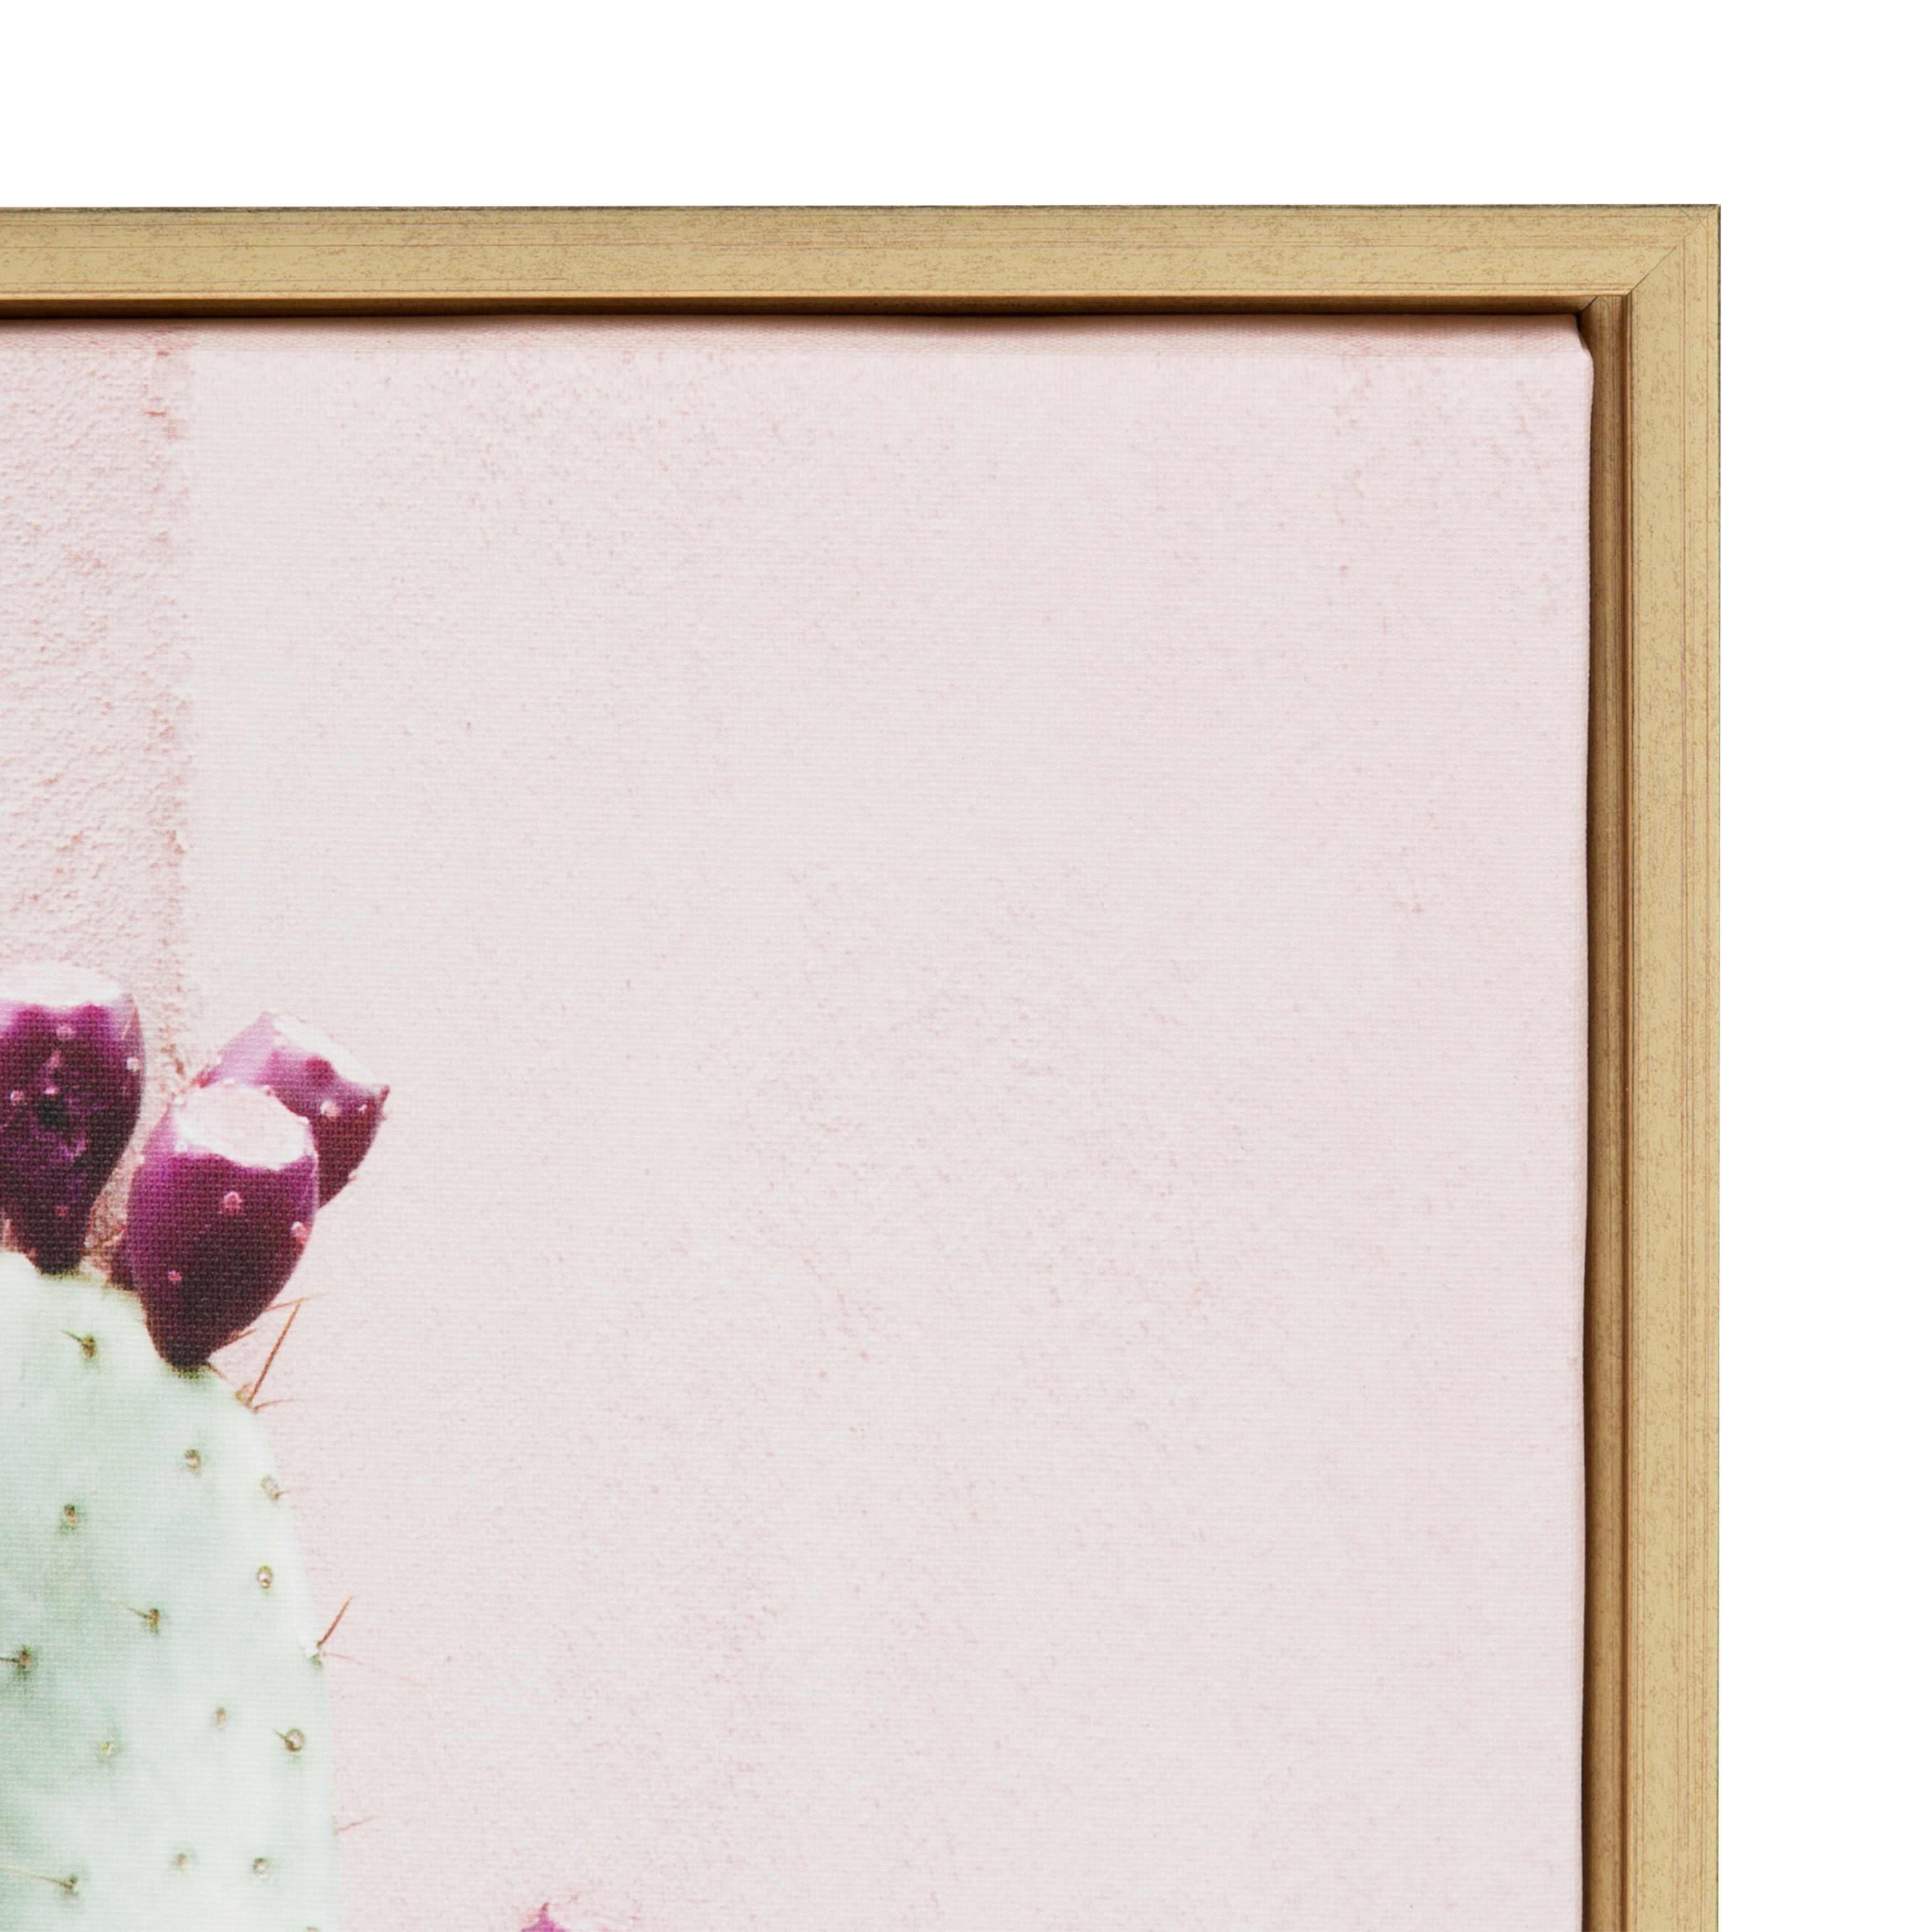 Kate and Laurel Sylvie Cactus 25 Framed Canvas Wall Art by Amy Peterson, 18x24  Gold